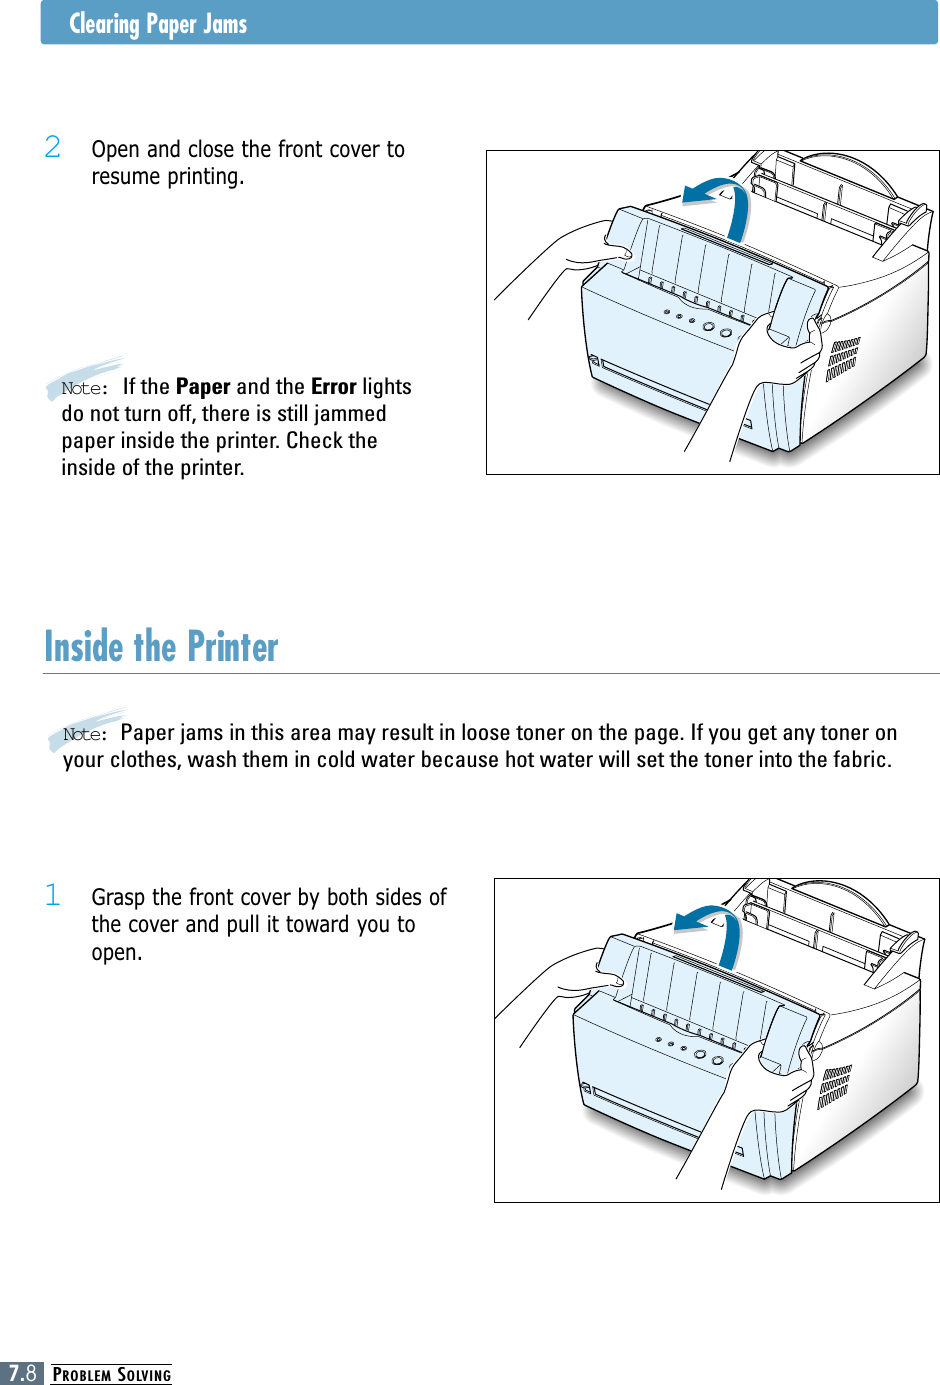 PROBLEM SOLVING7.8Clearing Paper Jams2 Open and close the front cover toresume printing.Note: If the Paper and the Error lightsdo not turn off, there is still jammedpaper inside the printer. Check theinside of the printer.Inside the Printer1 Grasp the front cover by both sides ofthe cover and pull it toward you toopen.Note:  Paper jams in this area may result in loose toner on the page. If you get any toner onyour clothes, wash them in cold water because hot water will set the toner into the fabric.